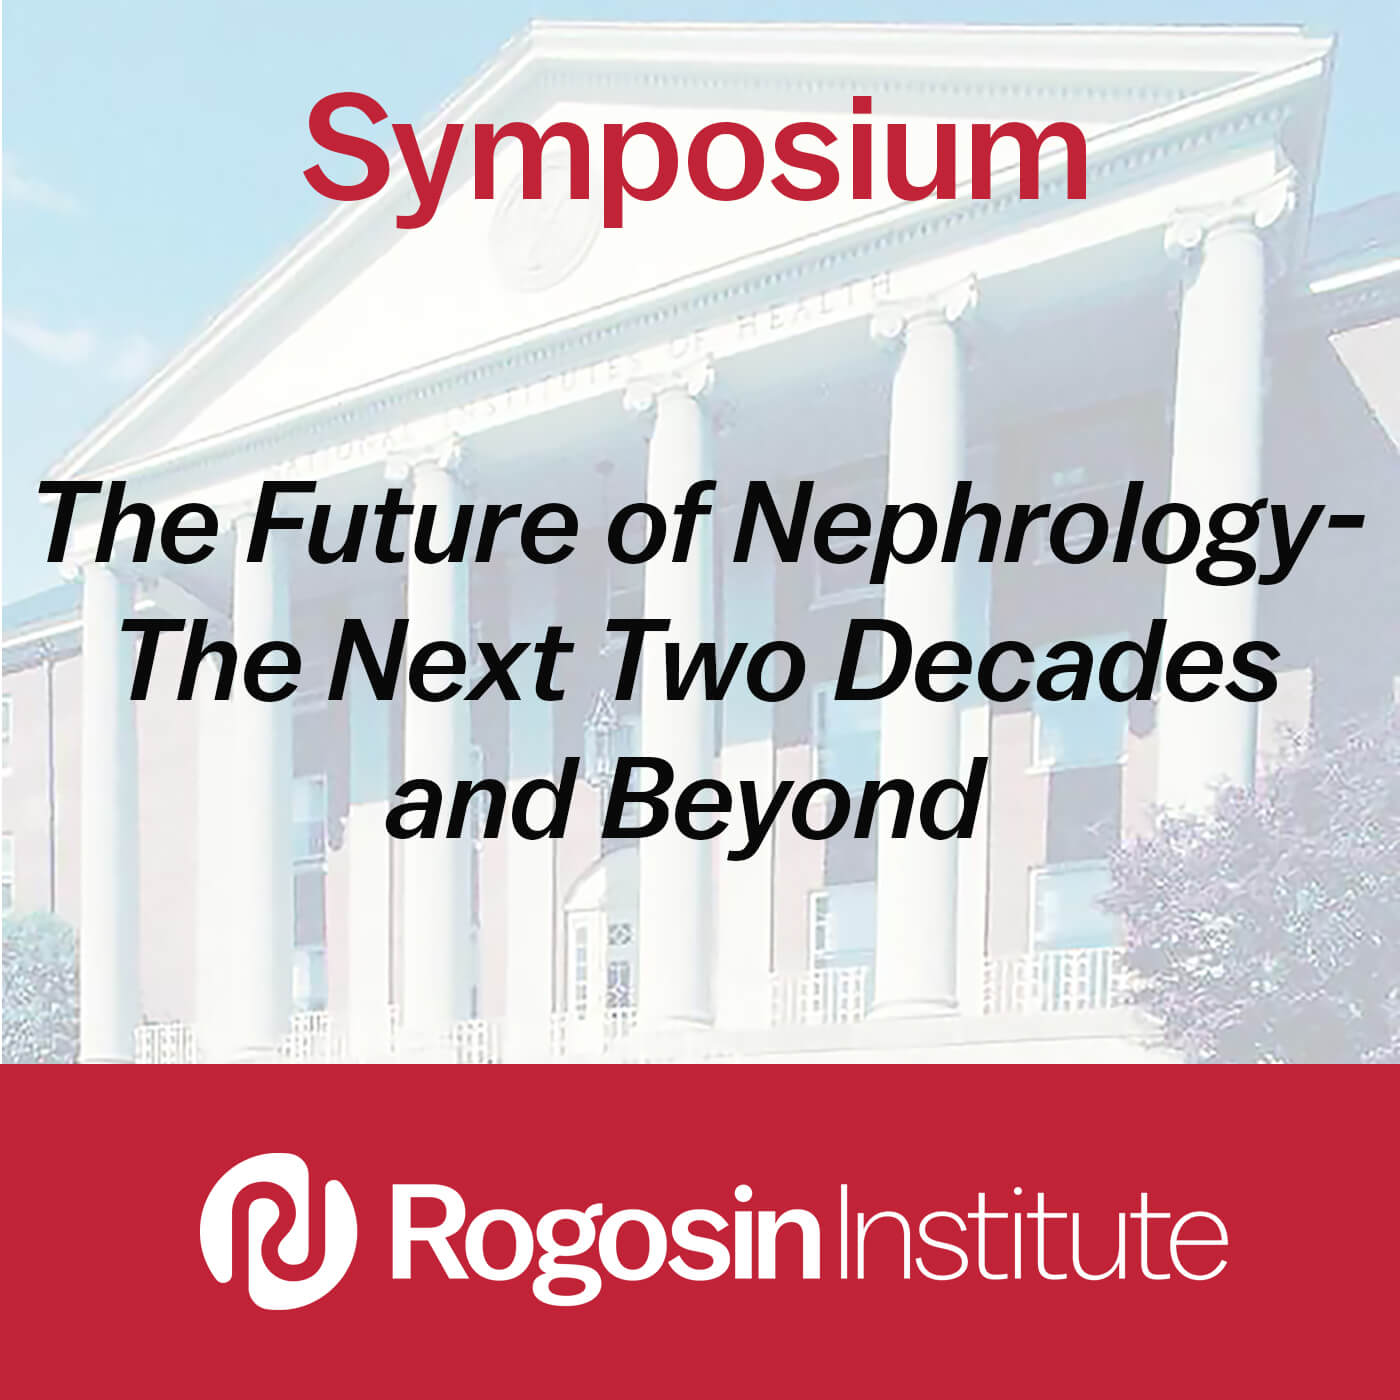 The Future of Nephrology from the Patient’s Perspective